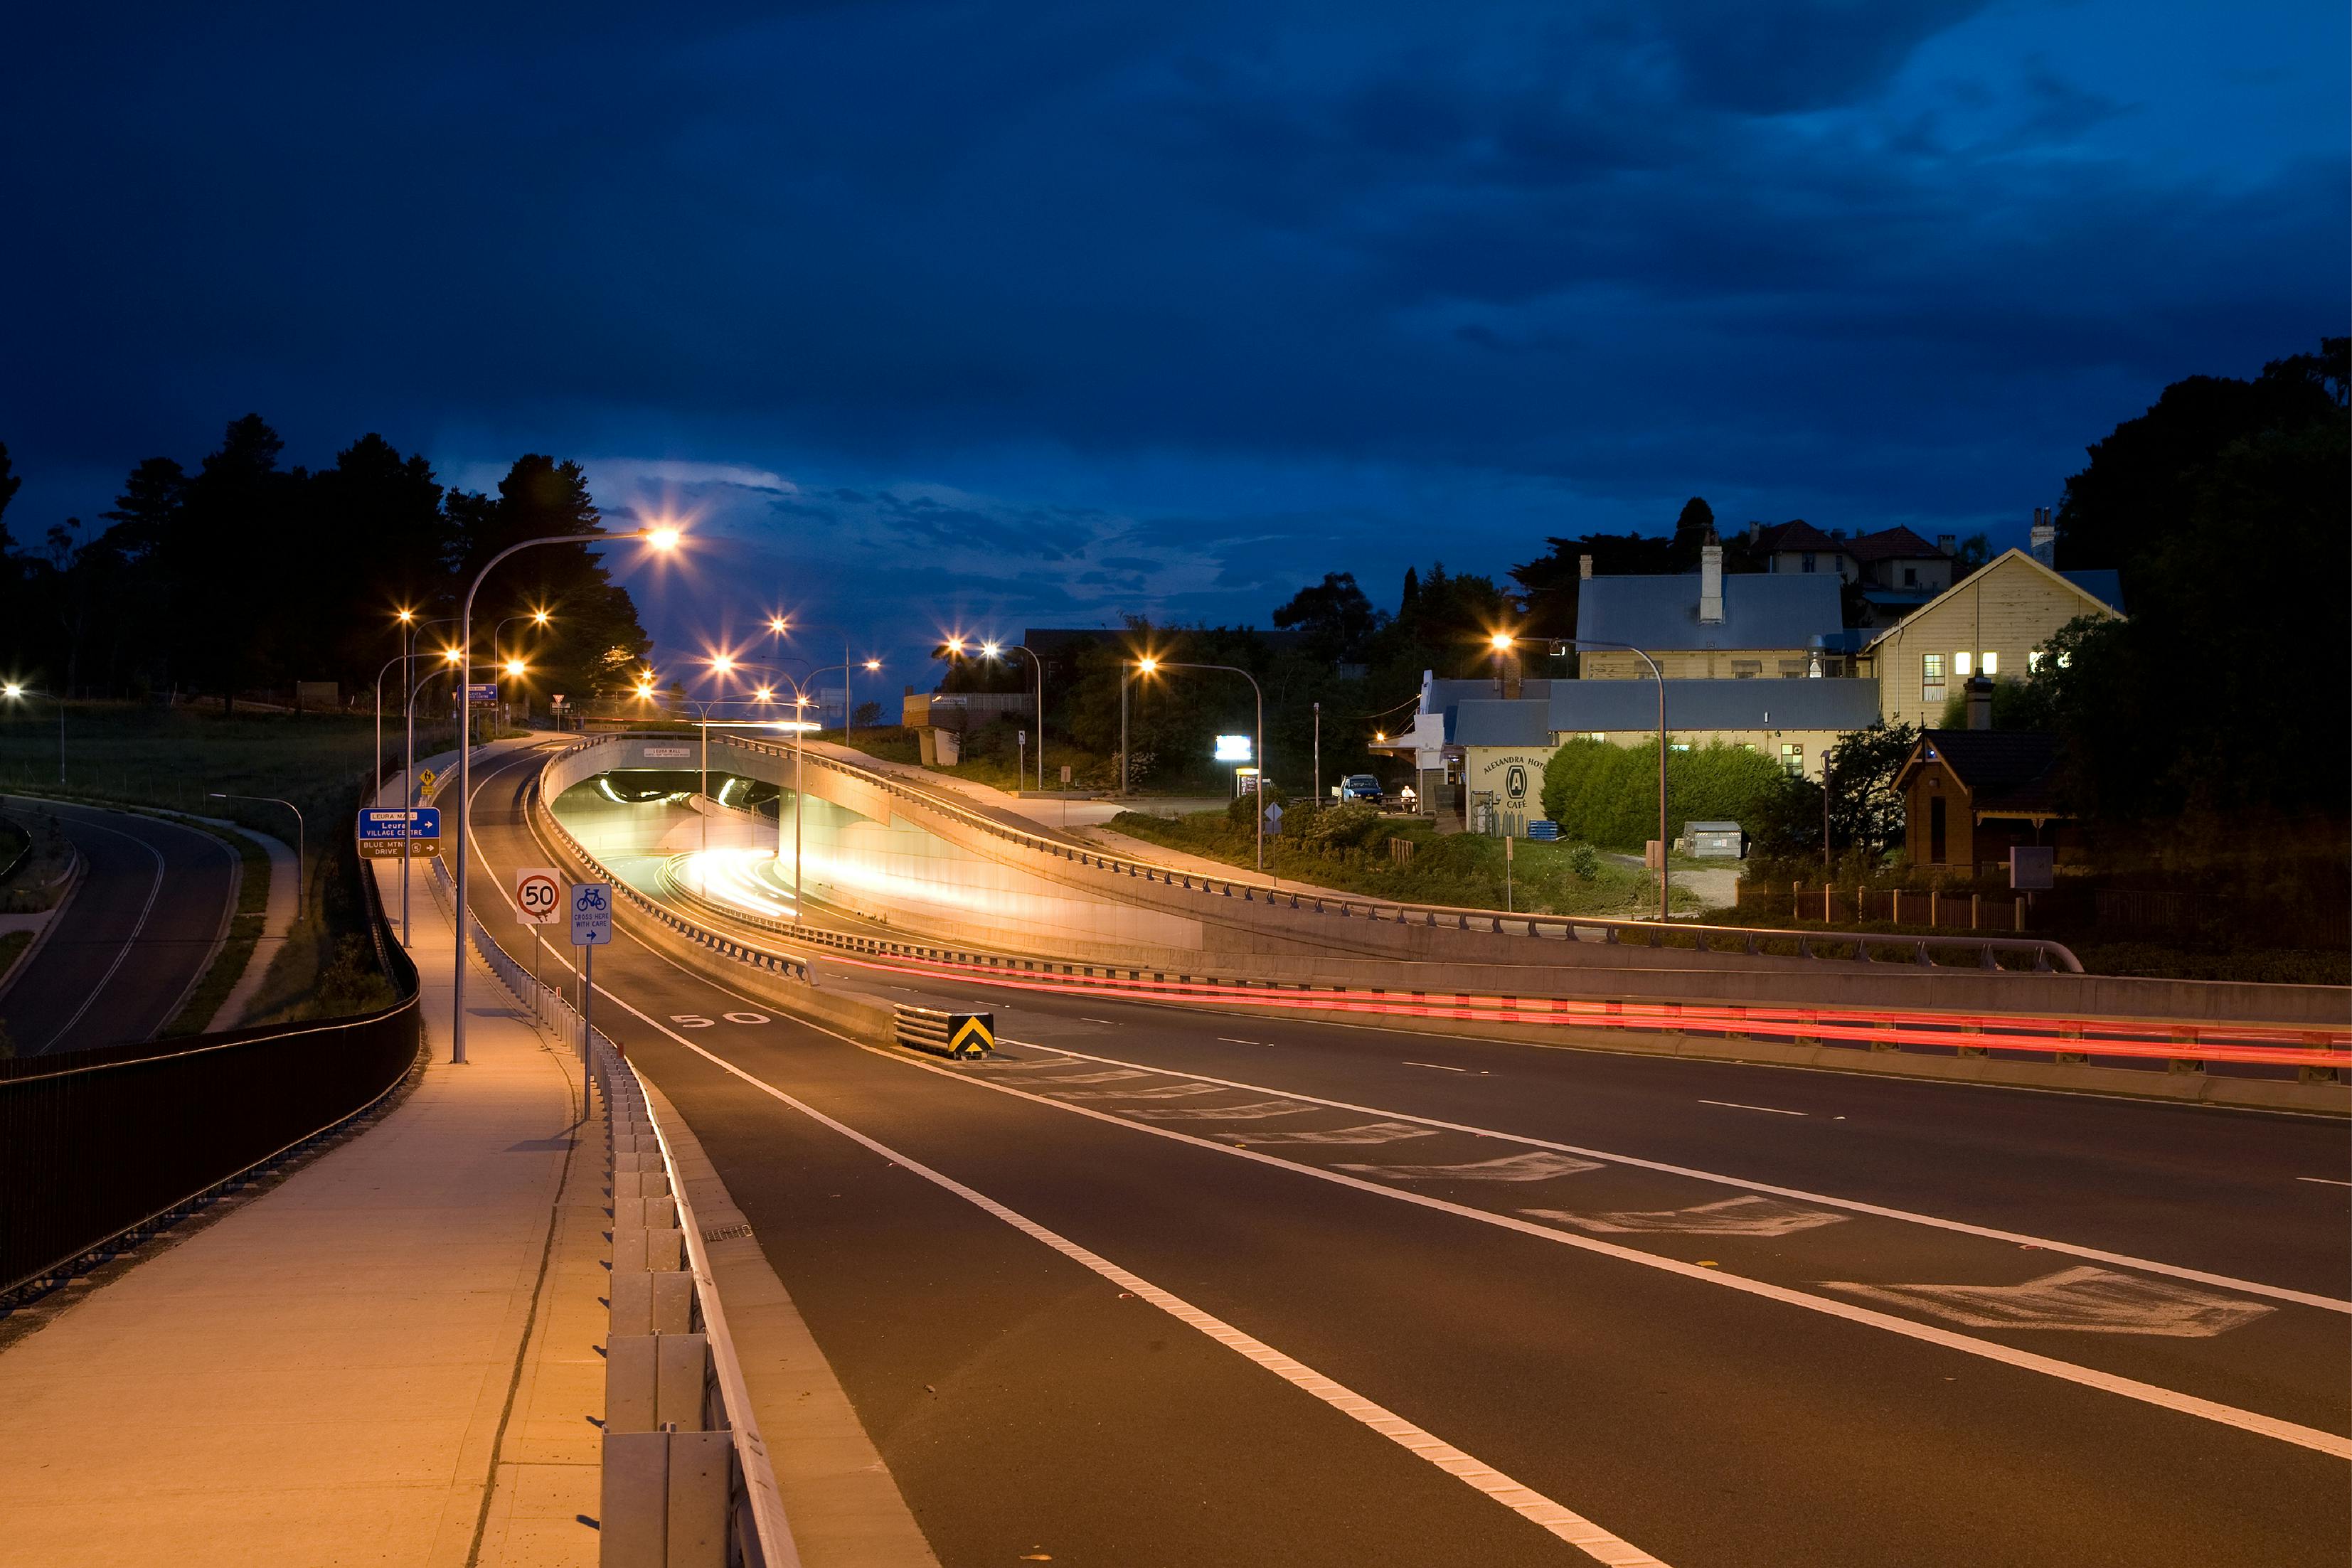 AILA NSW Award for Excellence in Landscape Architecture for Road Infrastructure Projects 